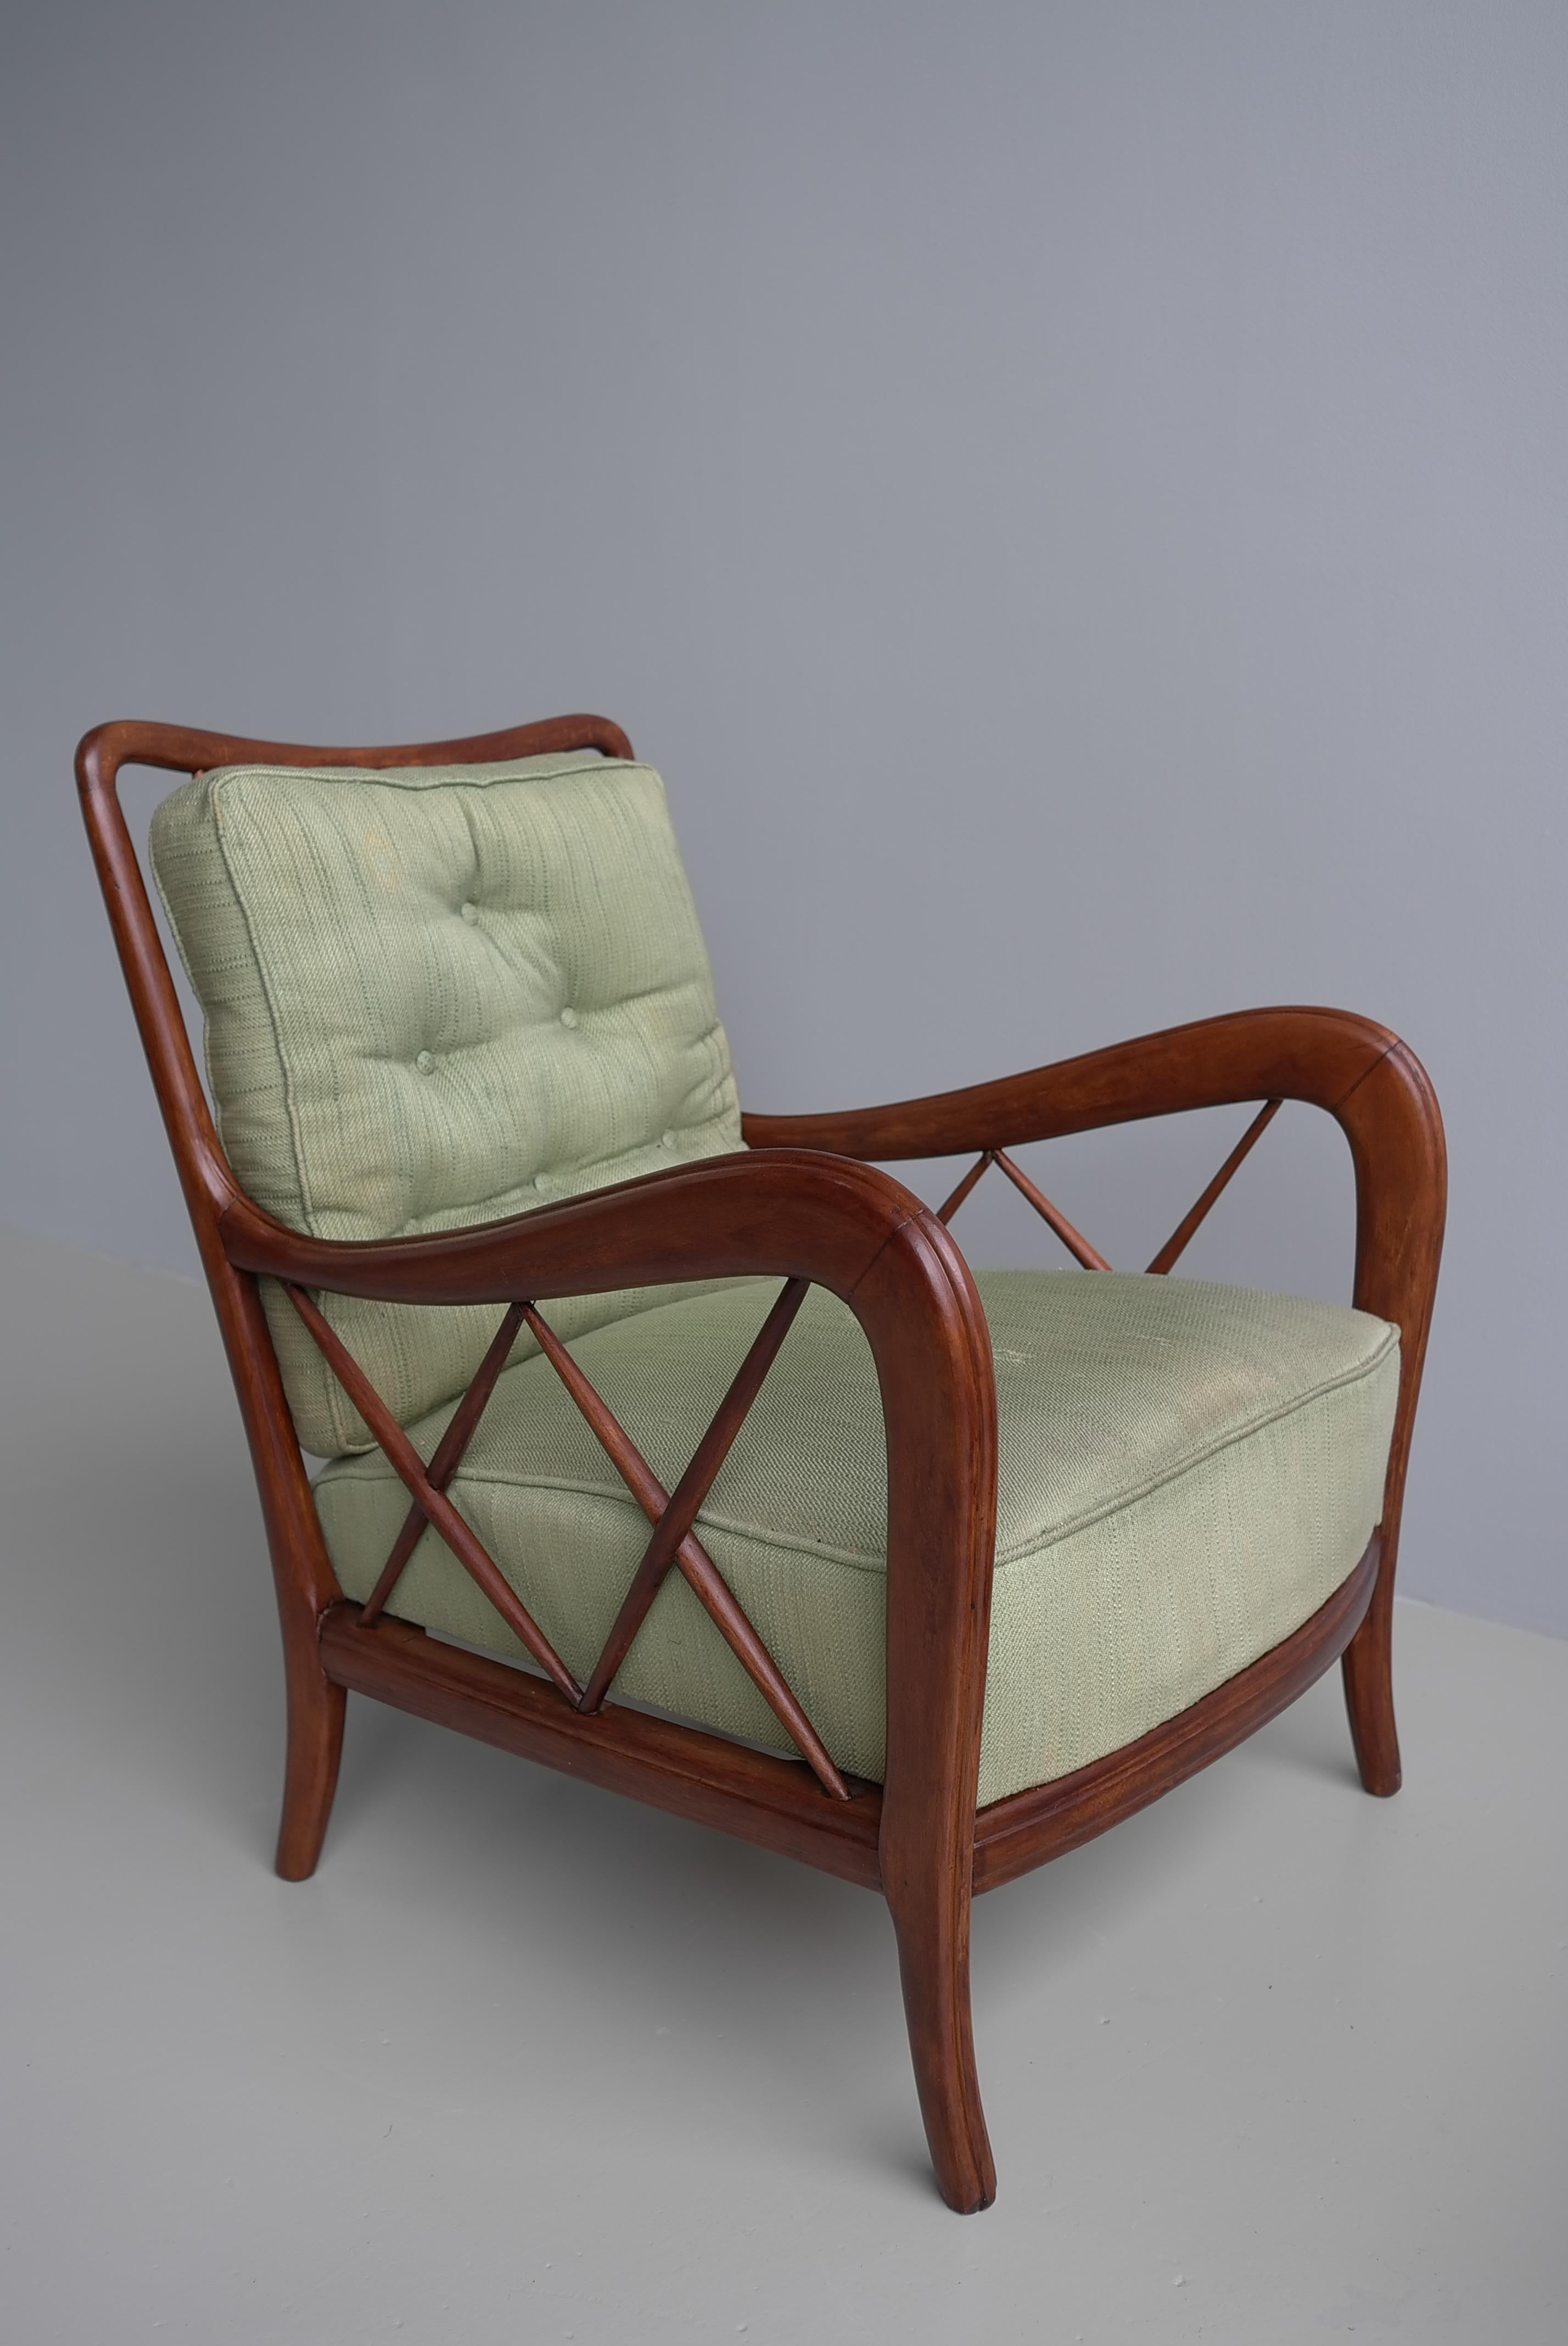 Walnut Wooden Lounge Chairs attr Paolo Buffa, Milan Italy 1940's For Sale 7